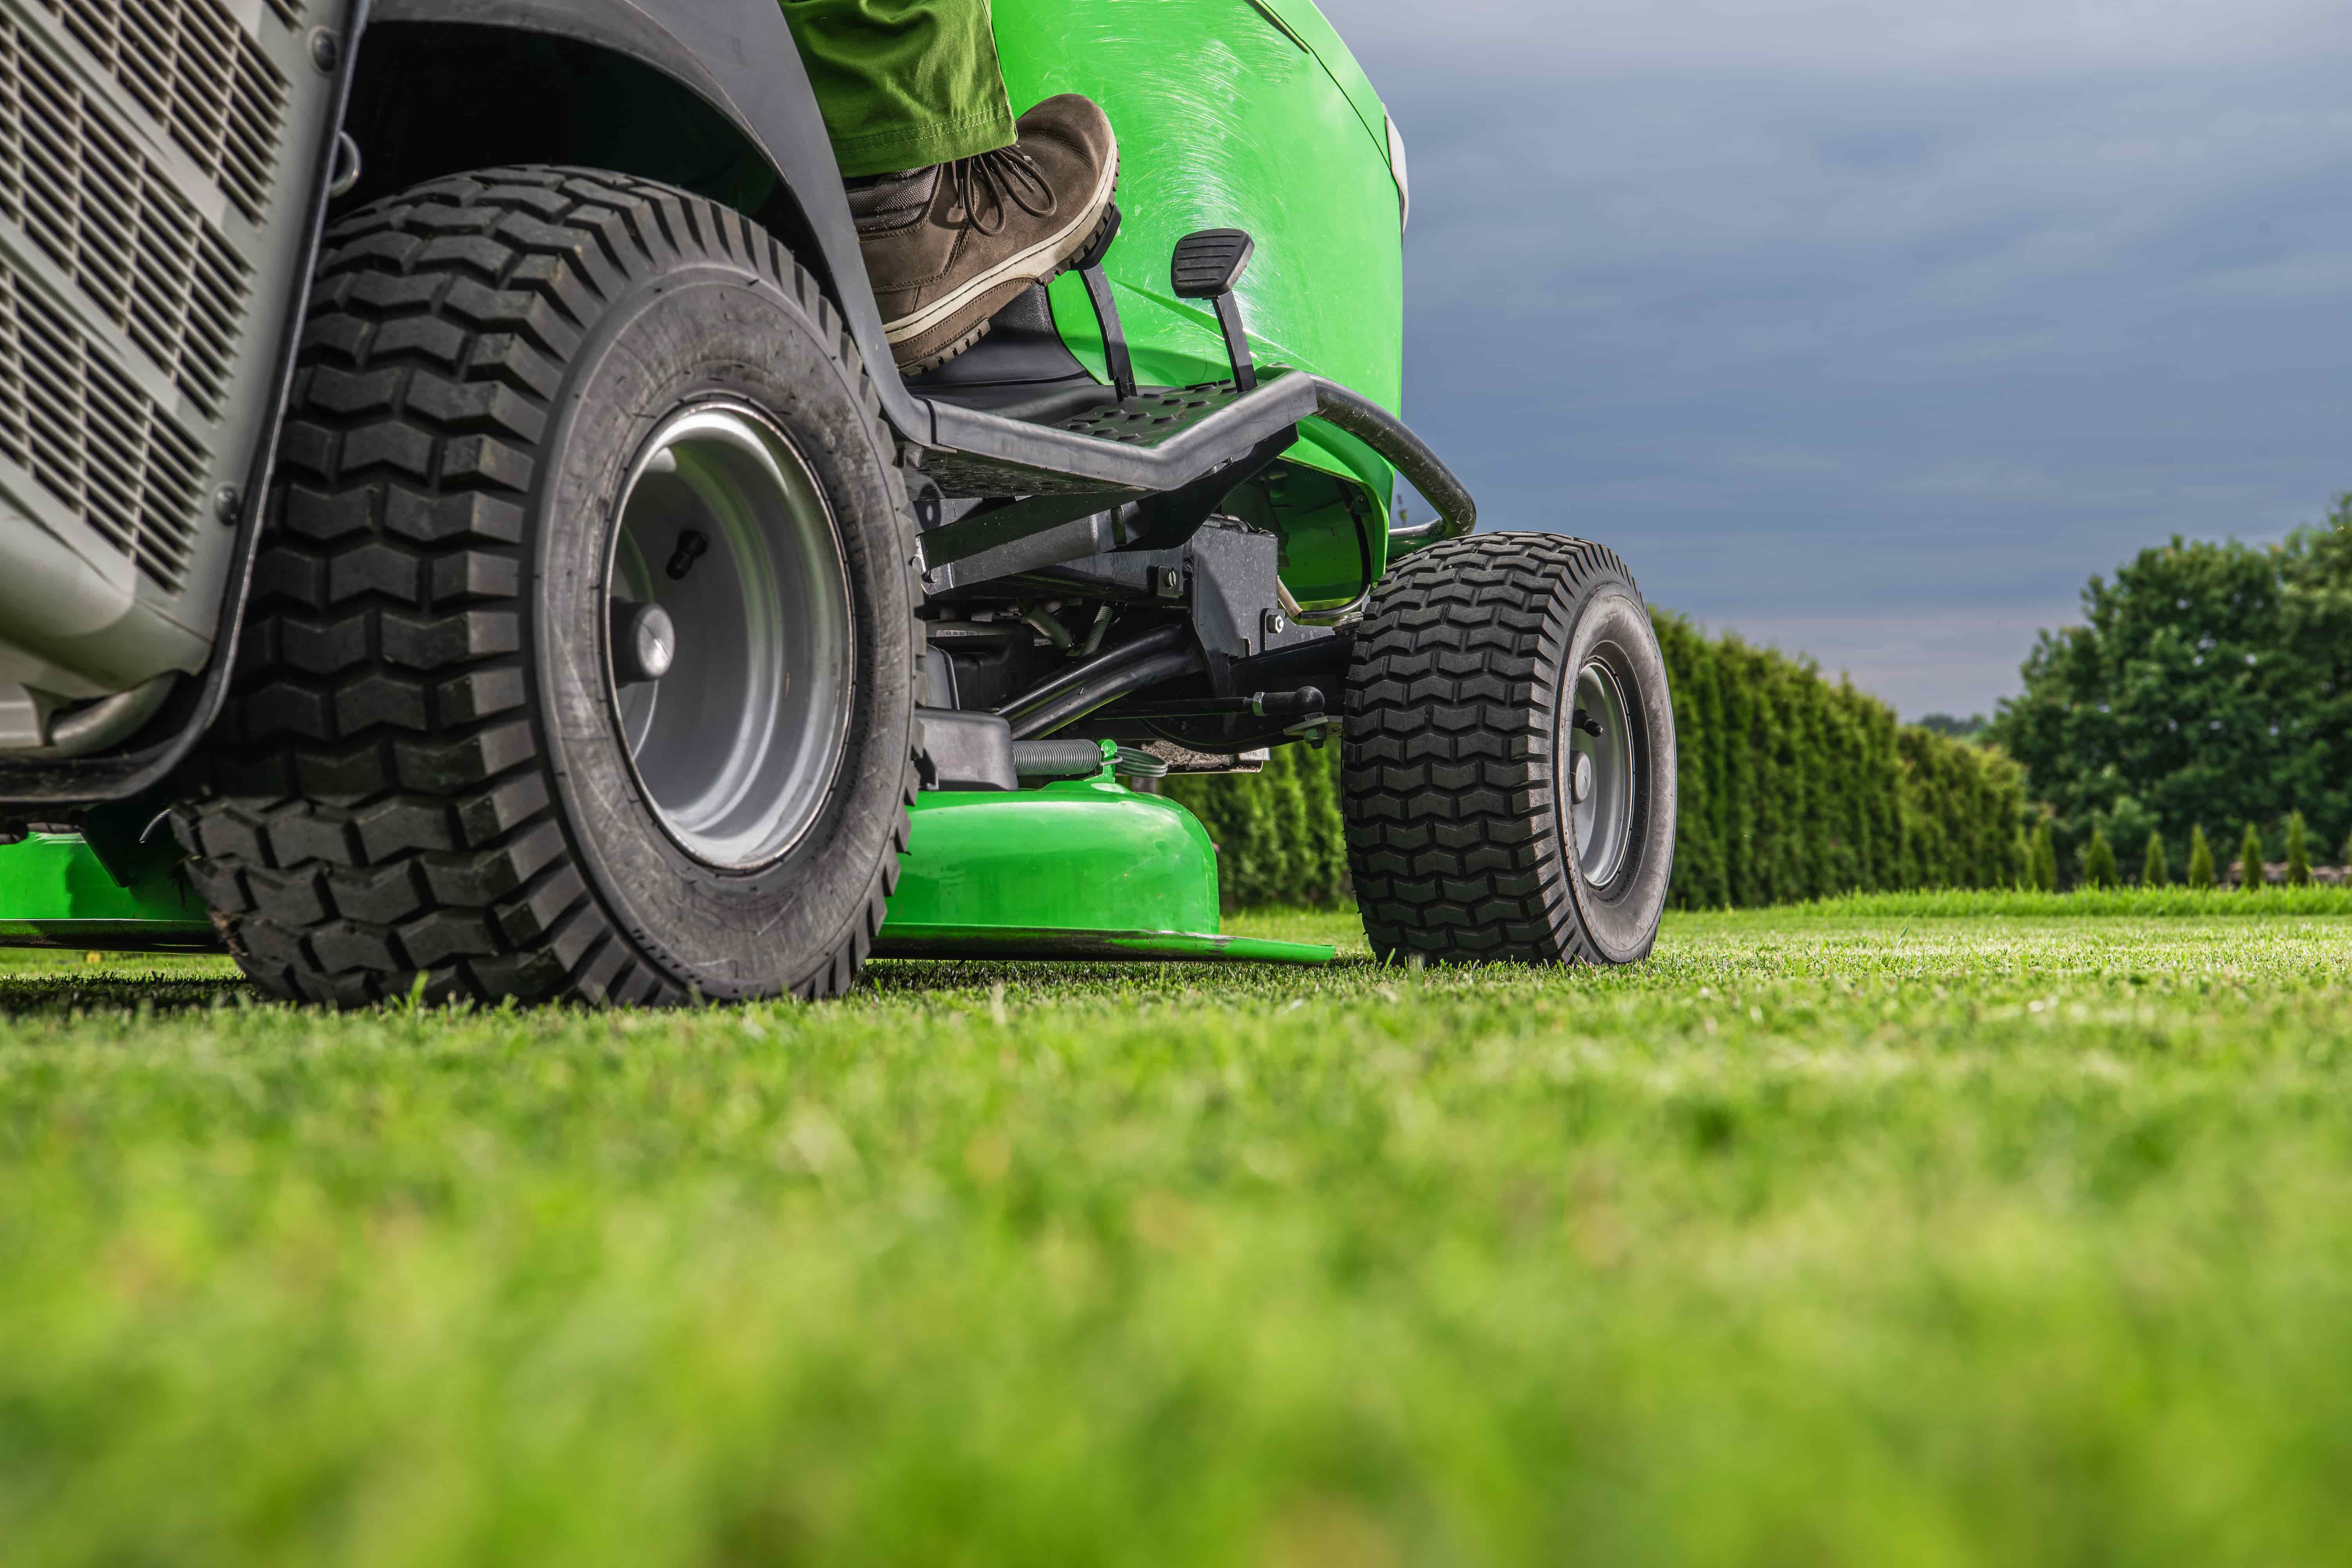 A green lawncare tractor has been fitted with R3 turf tires to minimize lawn damage as much as possible.